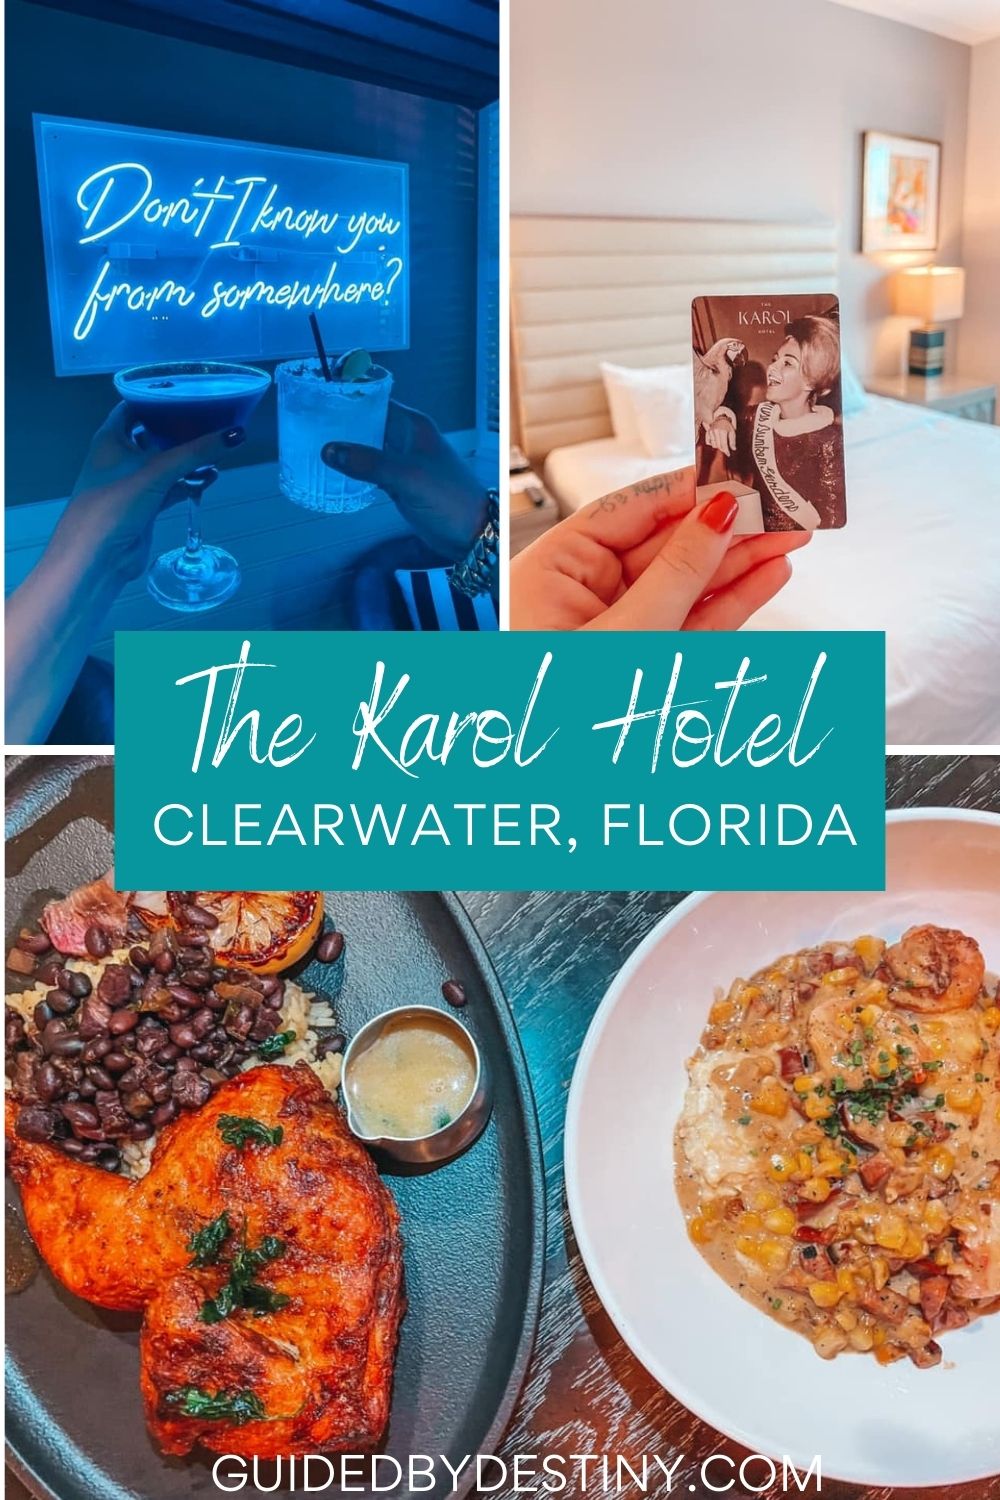 The Karol Hotel Clearwater, Florida